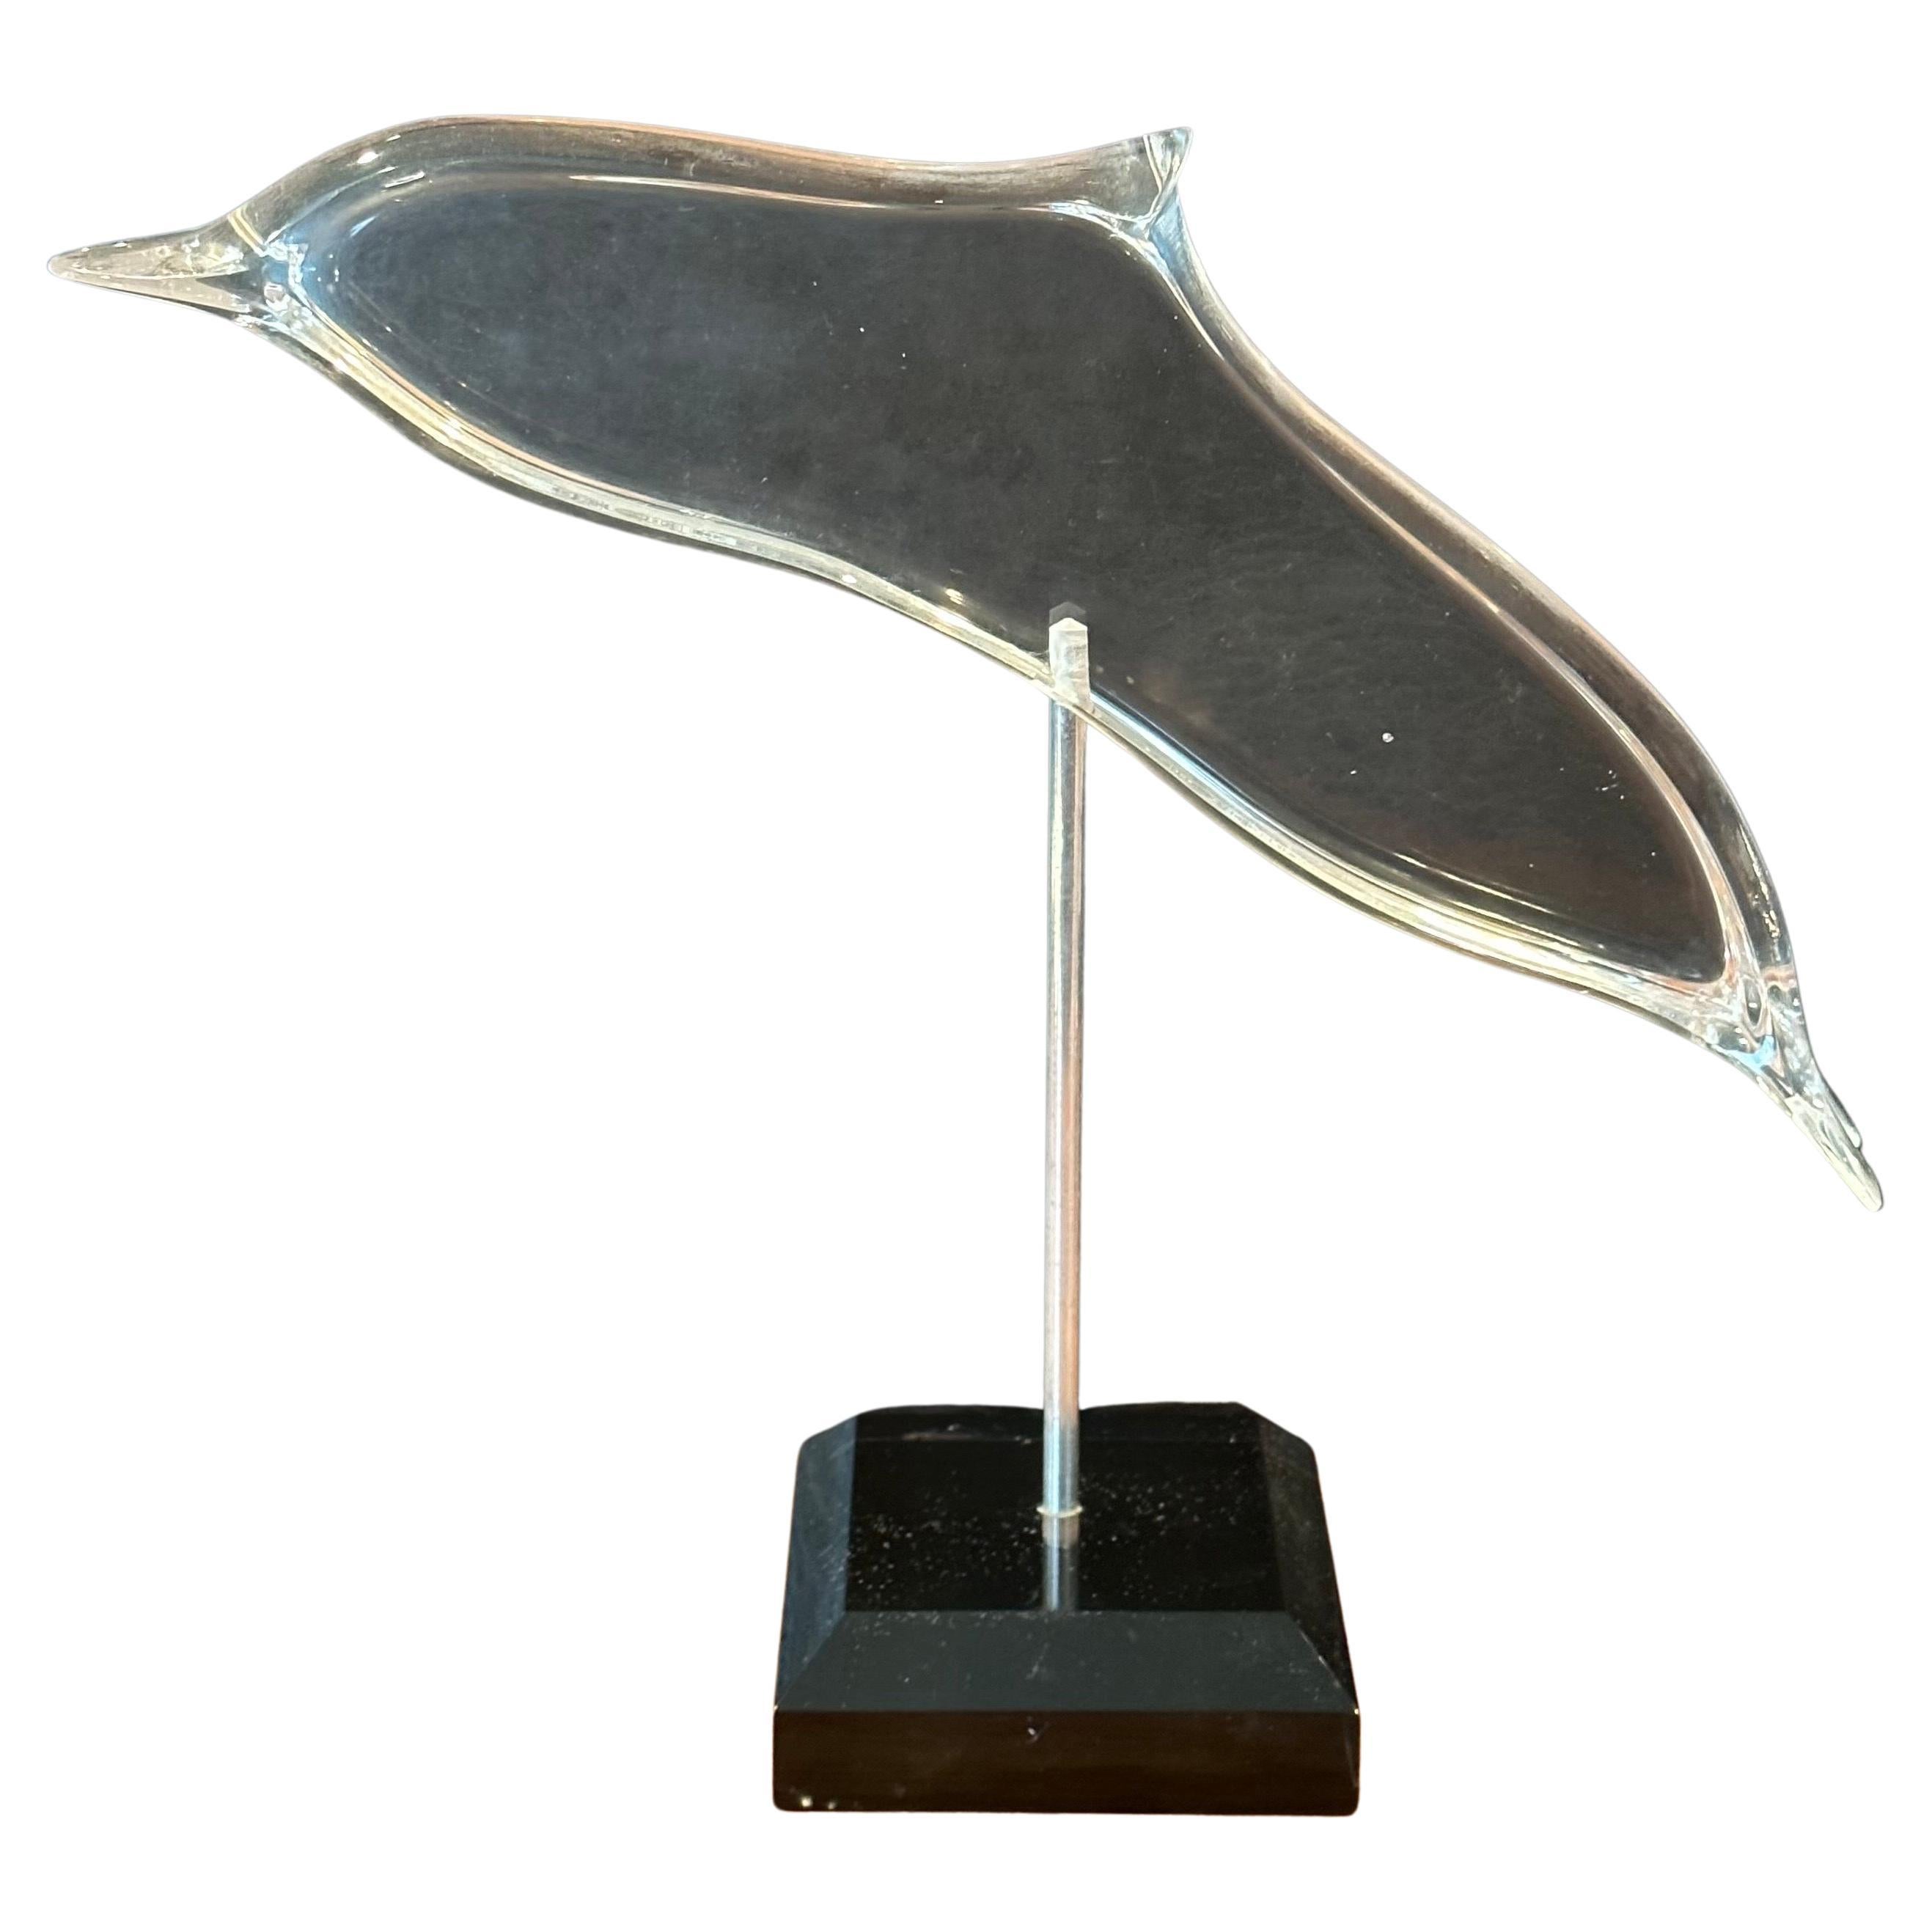 Beautiful clear lucite whale sculpture on black base, circa 1990s. The piece is in very good vintage condition with no chips or cracks and measures 12.5